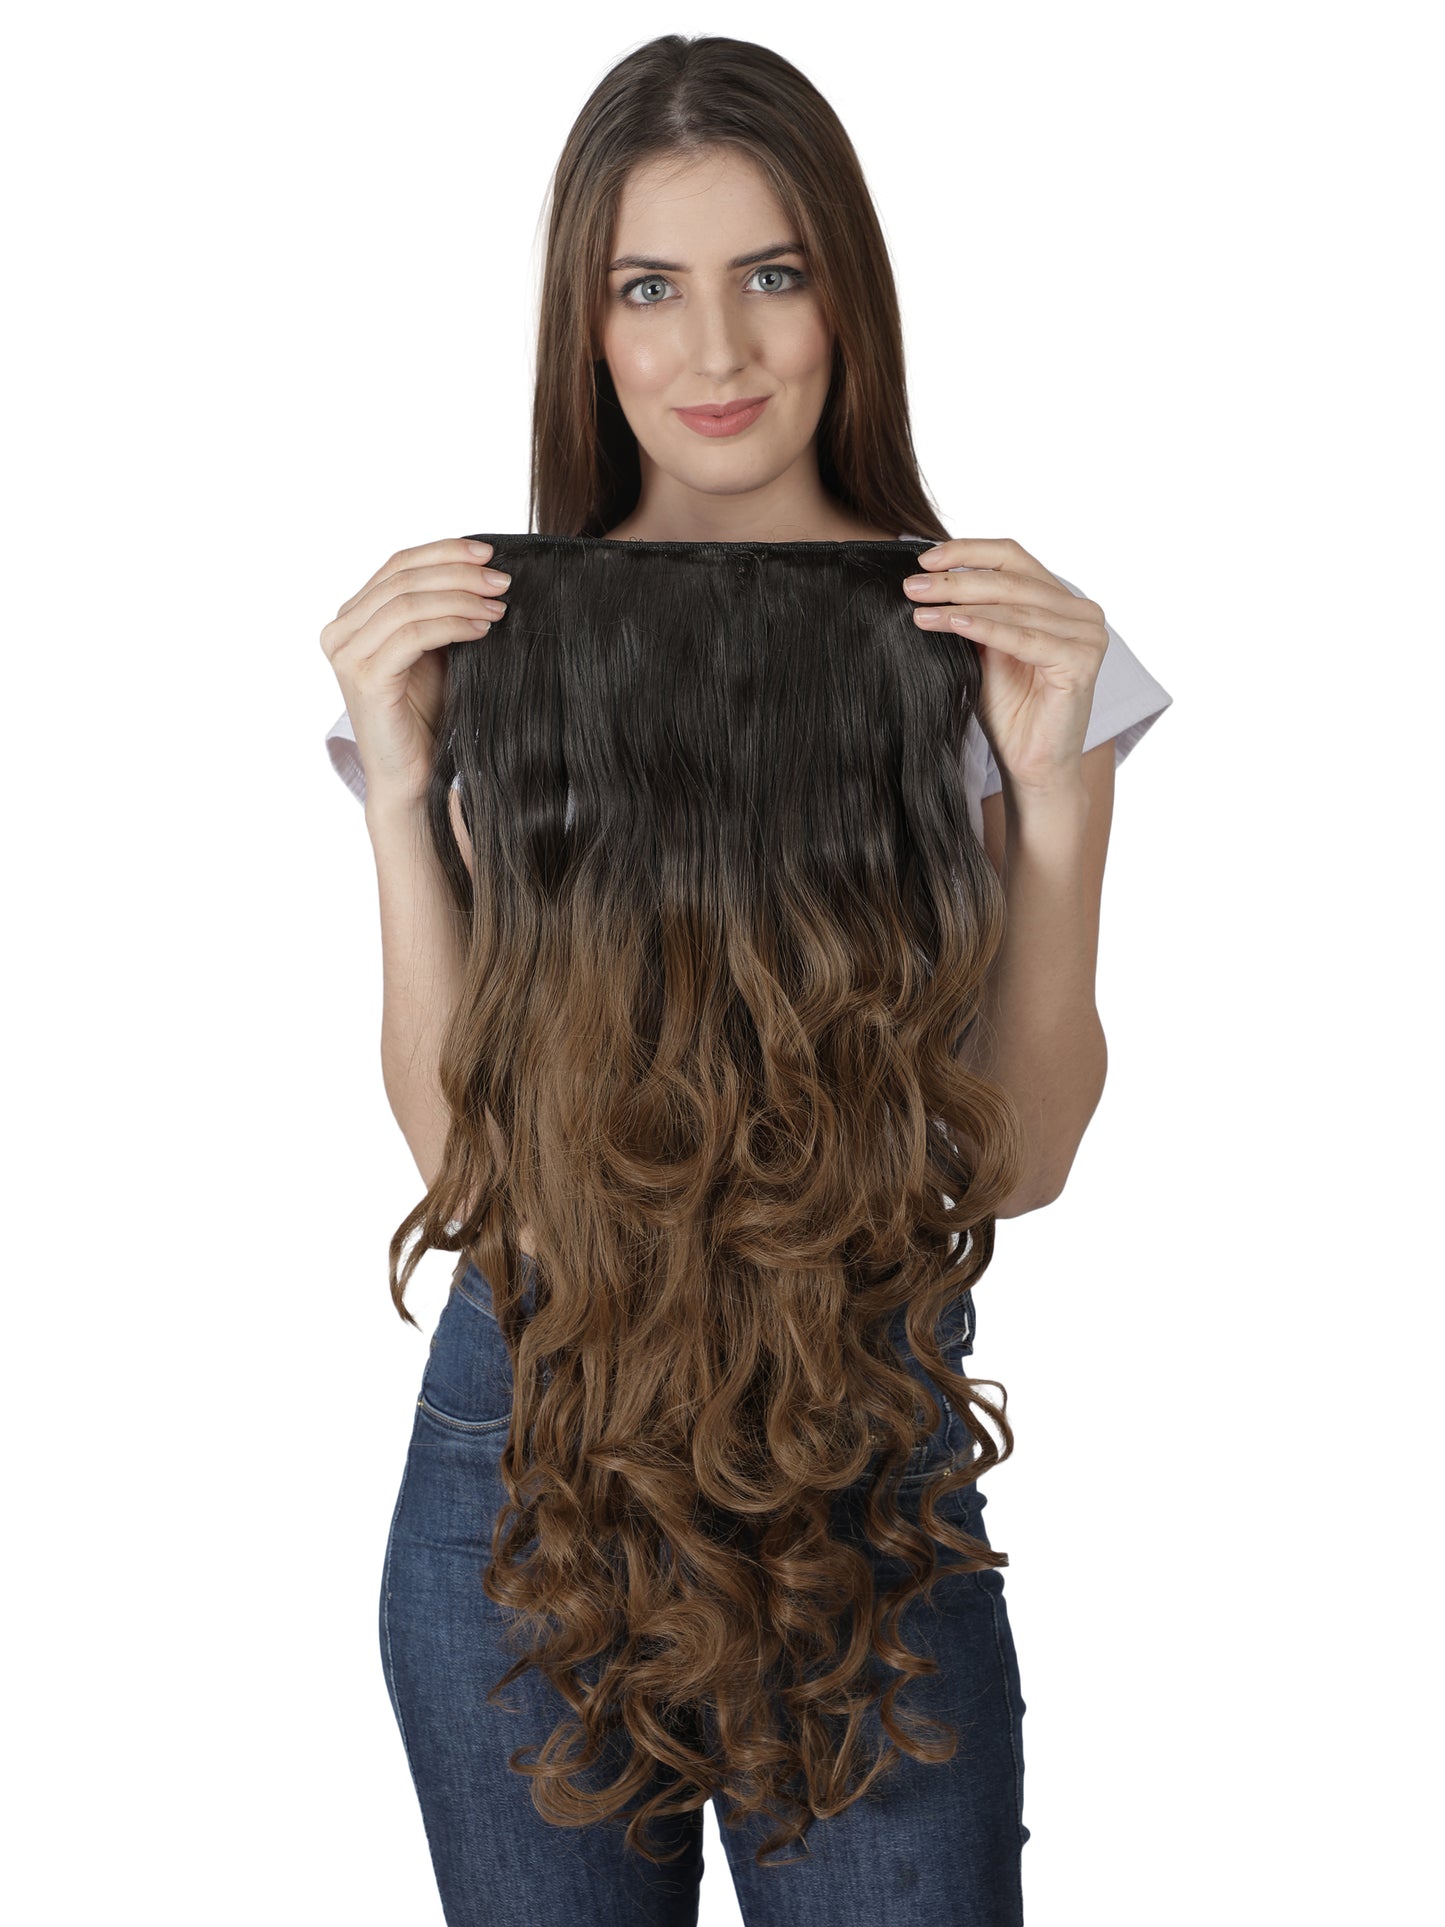 Lush Locks Chestnut Ombre Wavy Curly Clip In Hair Extensions